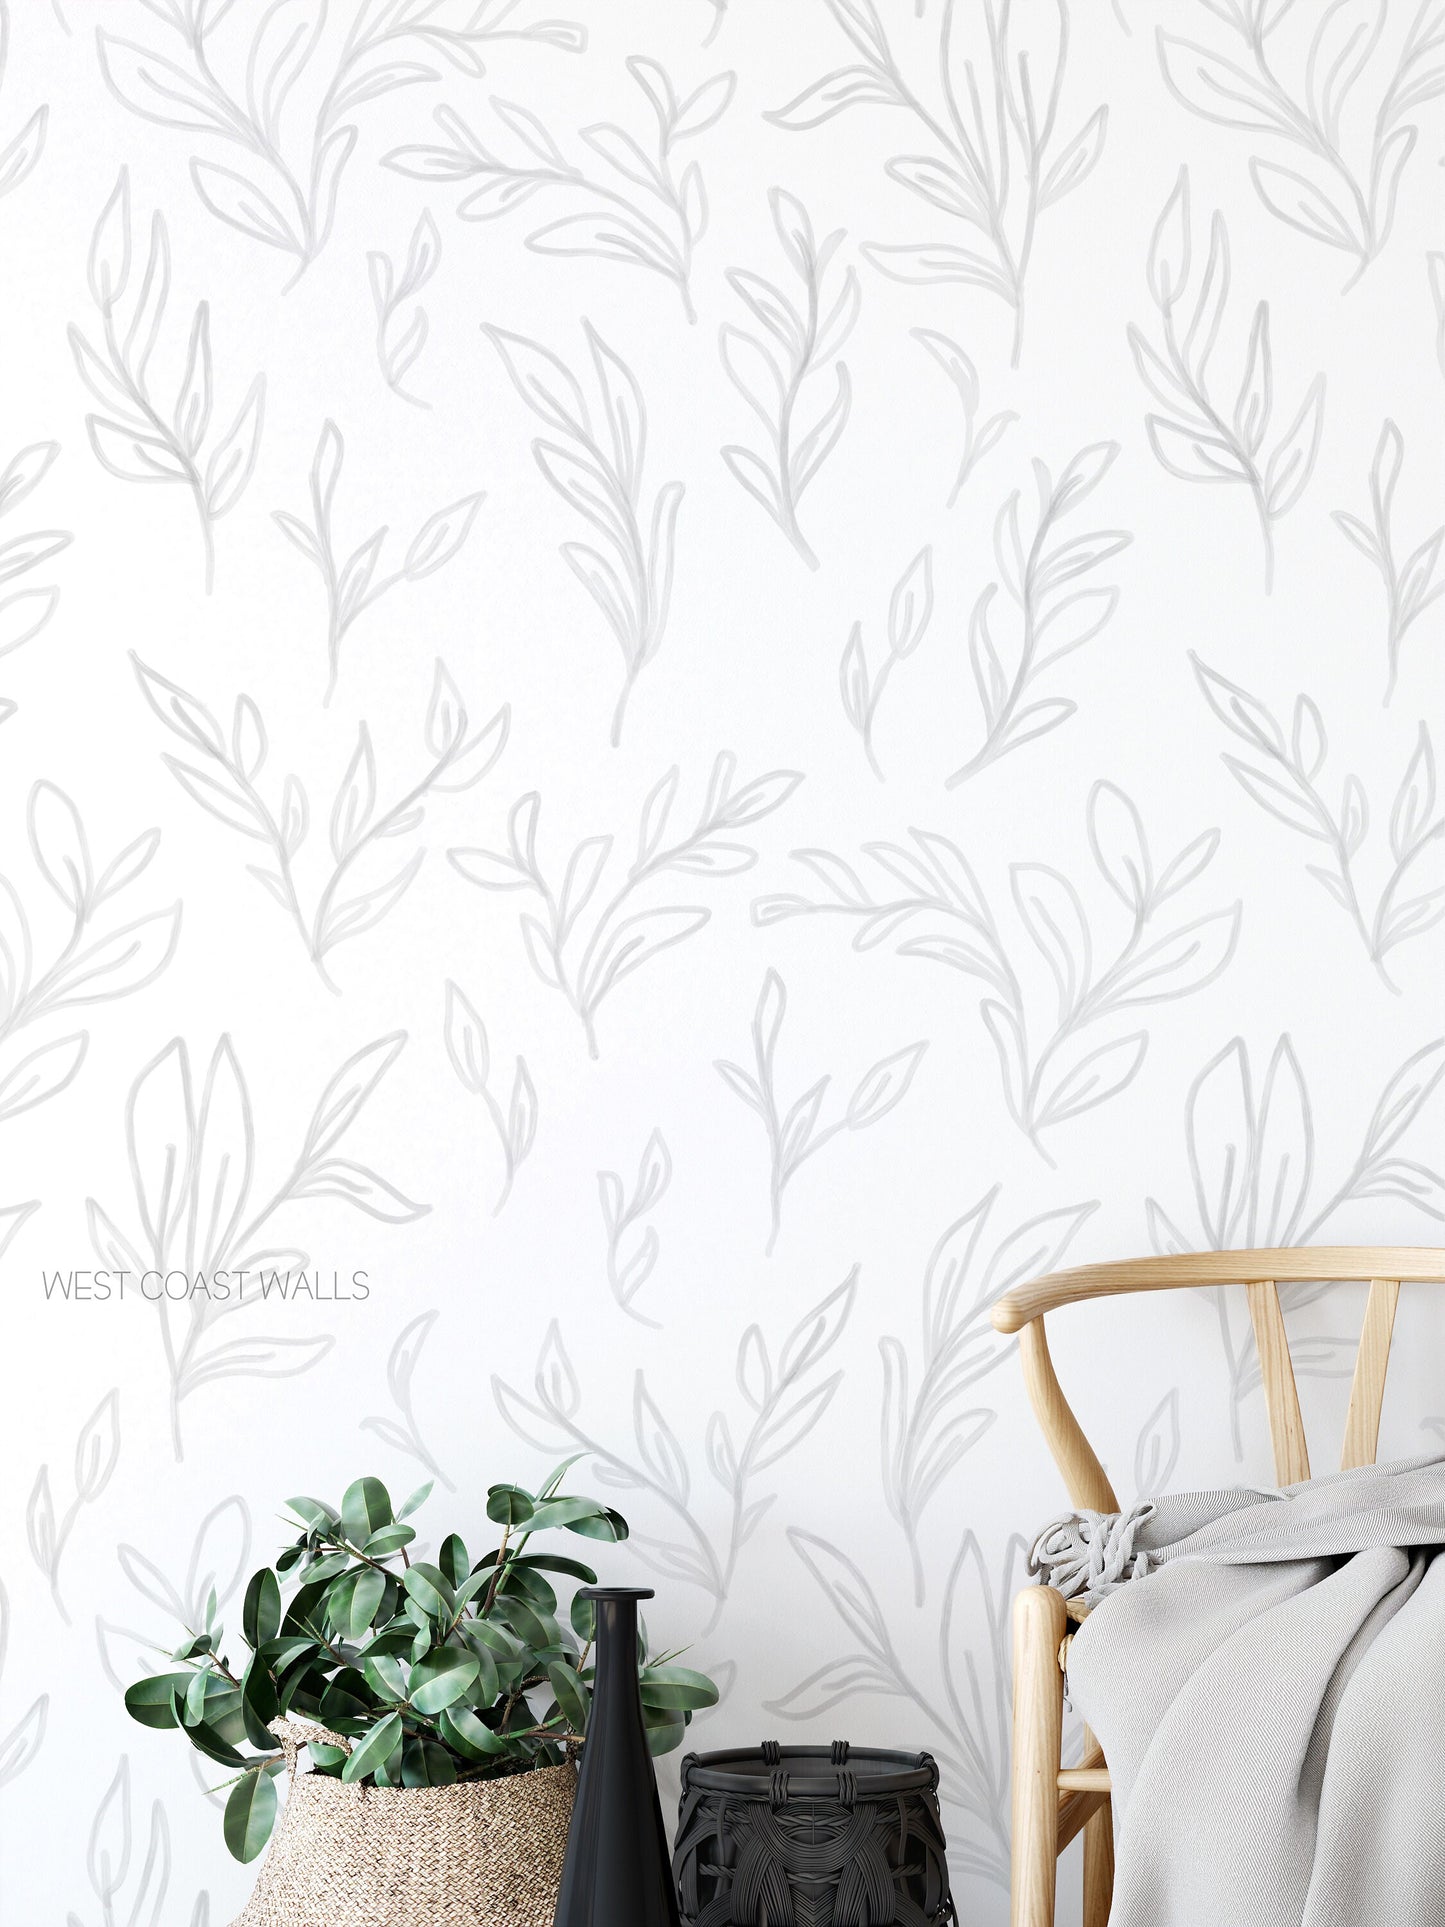 CLEARANCE Painted Leaves Wallpaper 7 rolls of 24"x96"